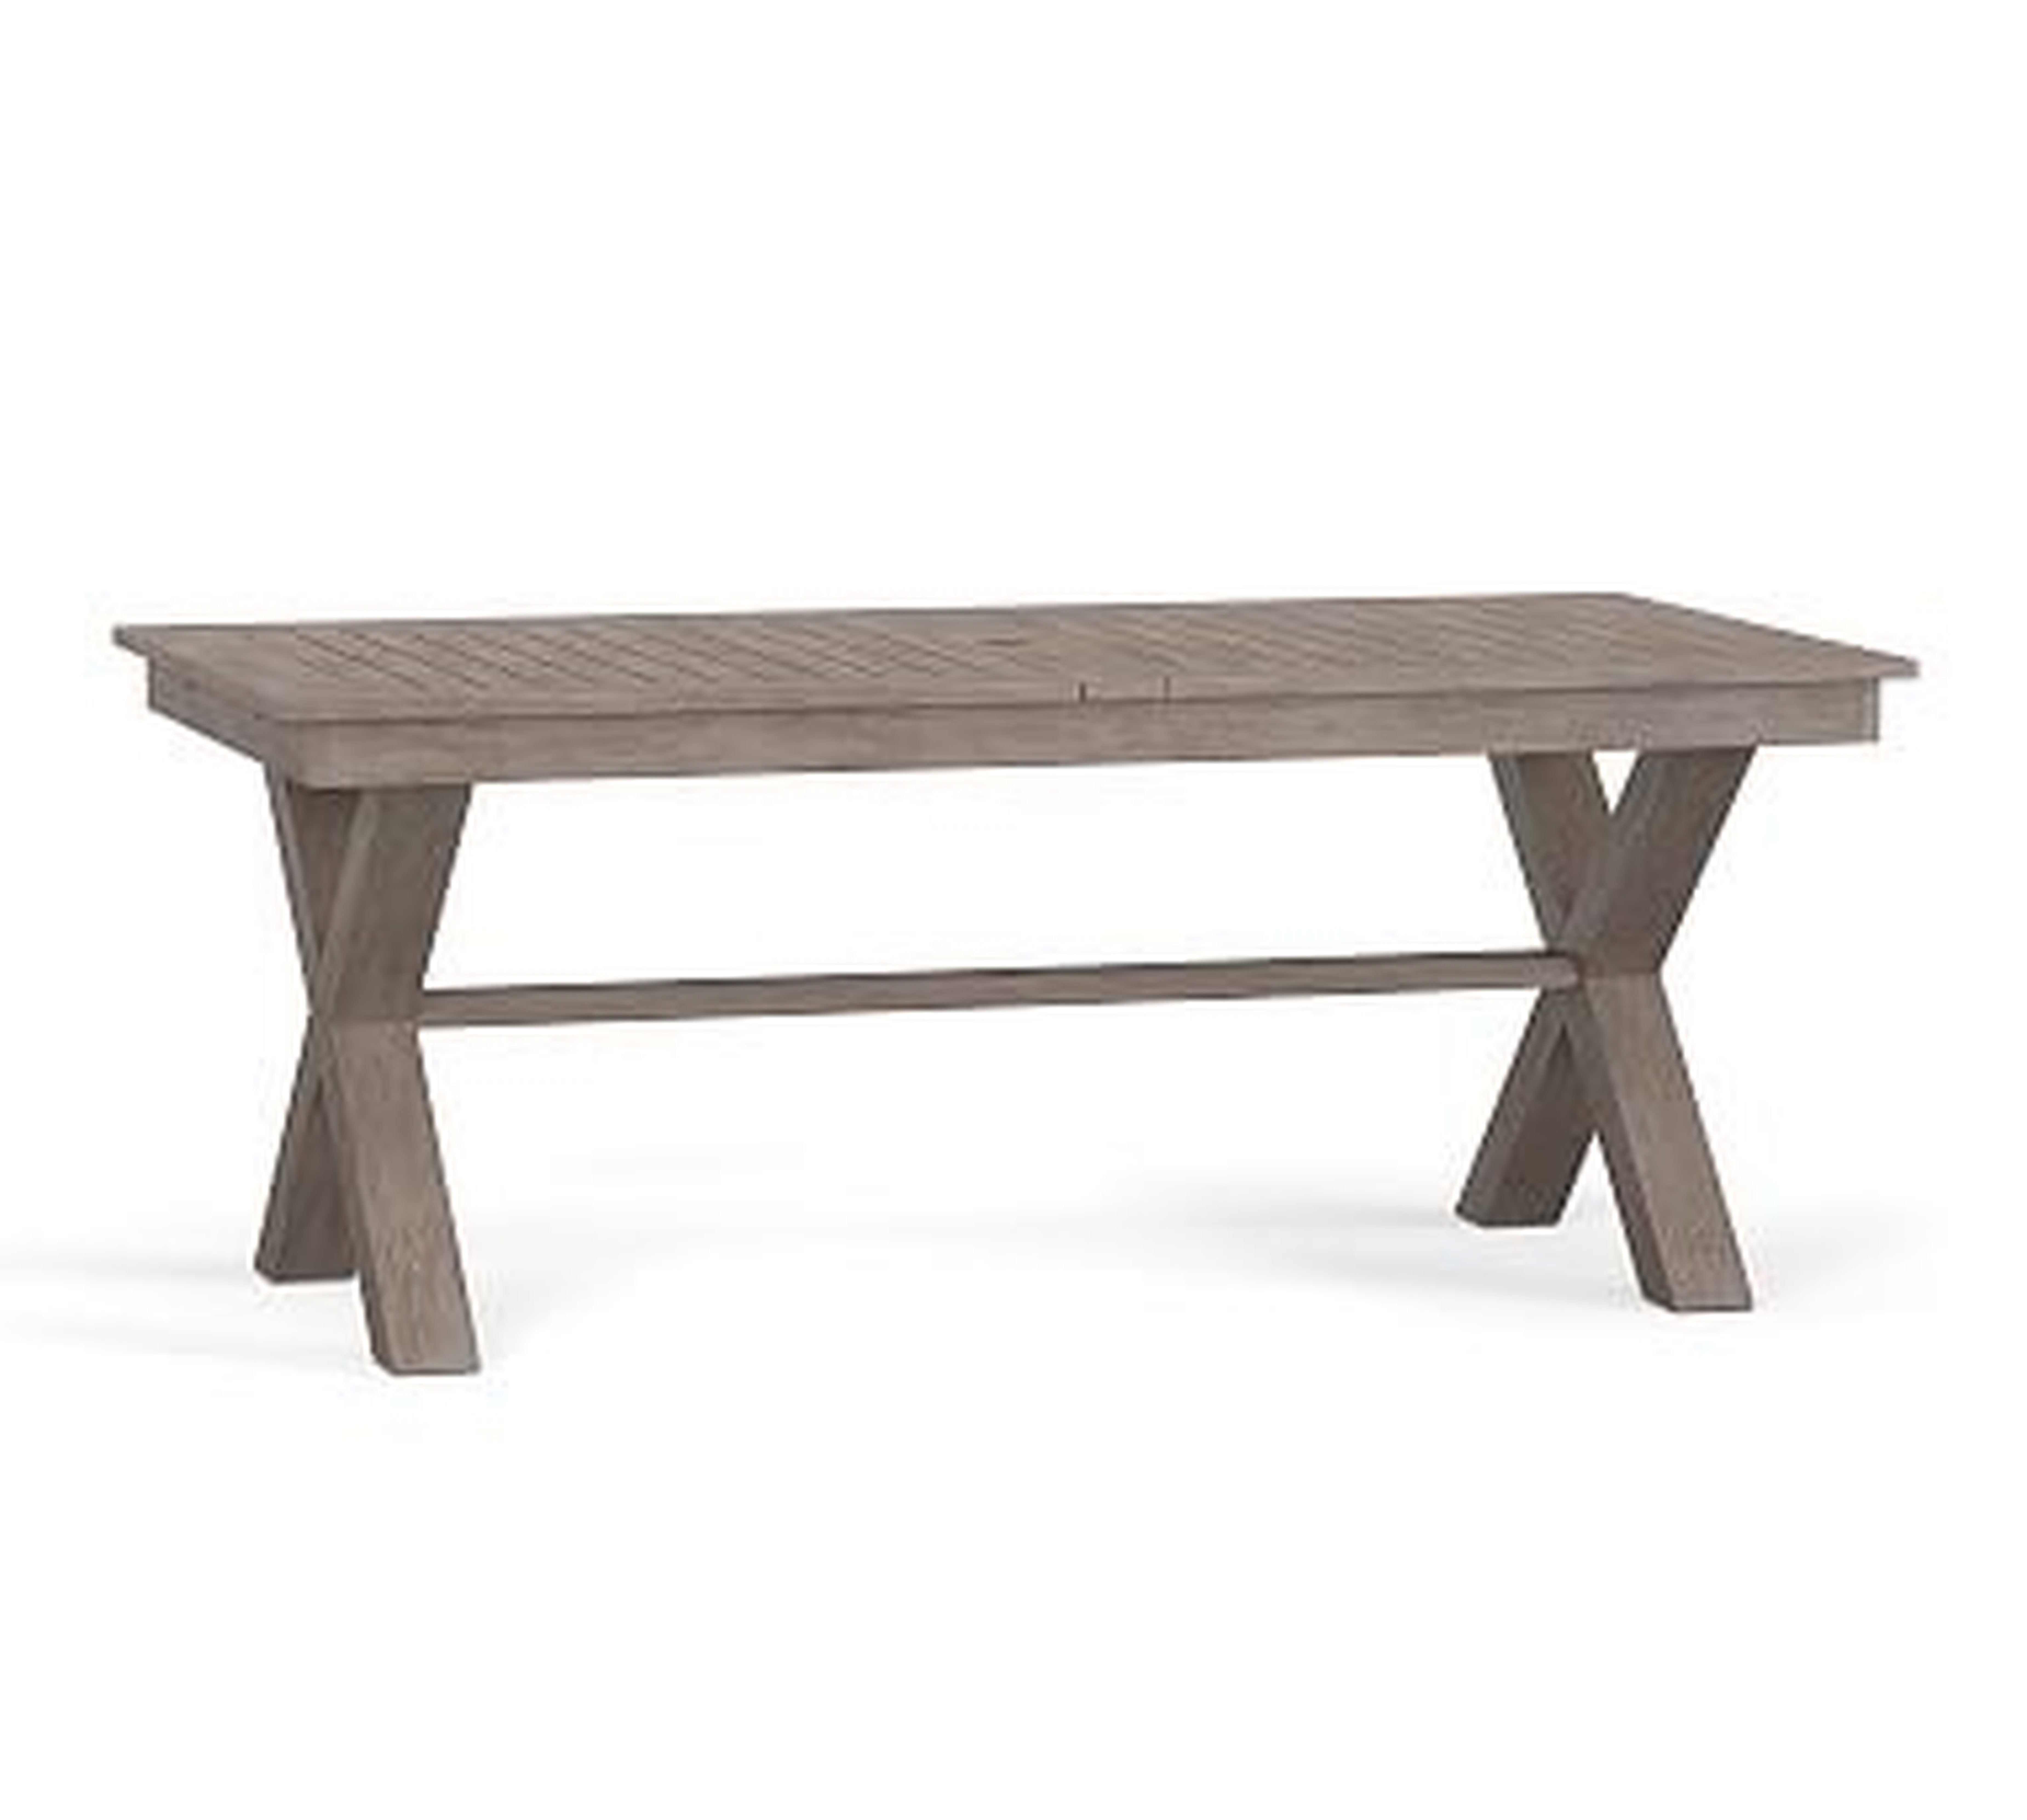 Indio Wood X-Base Rectangular Extending Dining Table, Weathered Gray - Pottery Barn